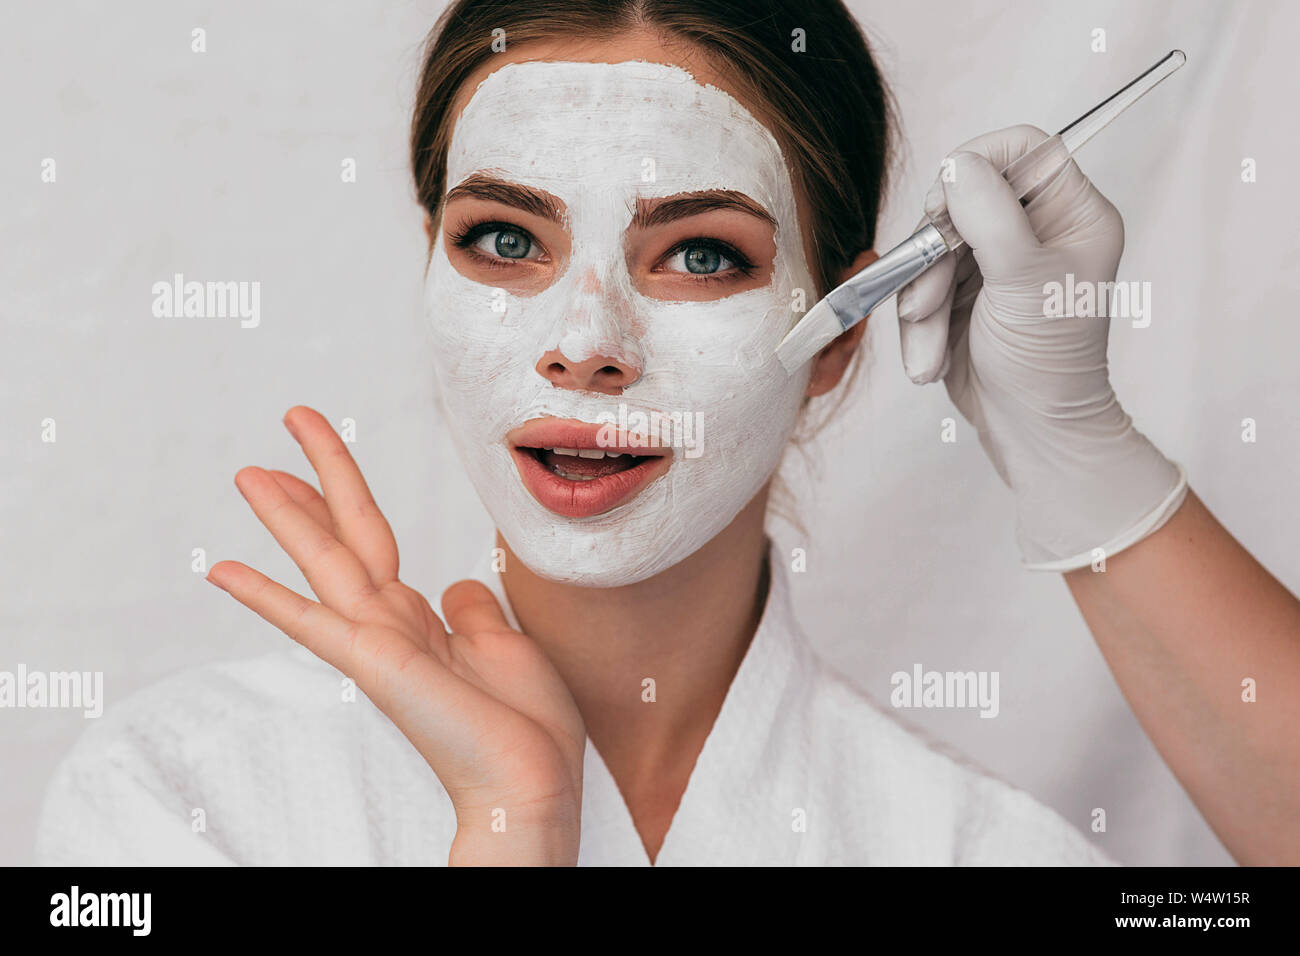 woman with beauty mask on face making surprised face. Wow it is cool beauty mask for moisturizing skin Stock Photo